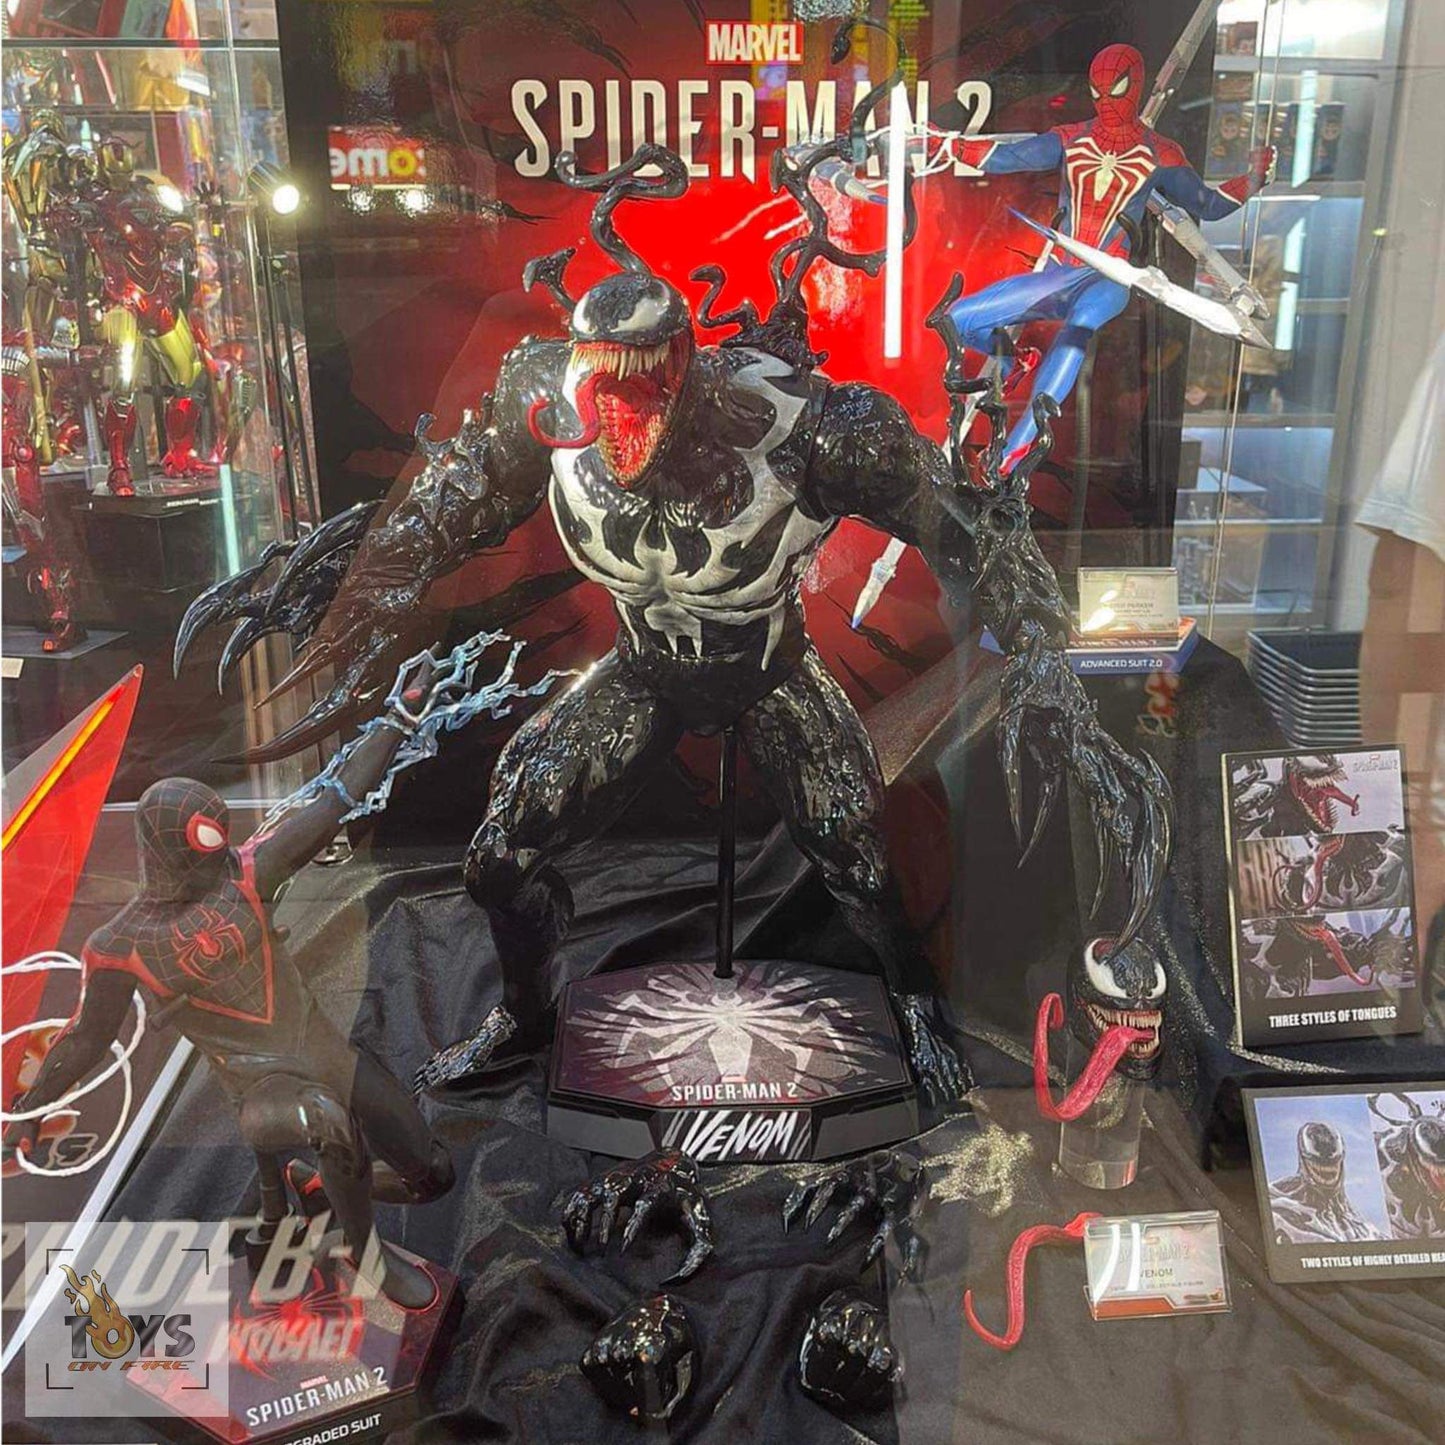 PRE-ORDER HOT TOYS VGM59 MARVEL'S SPIDER-MAN 2 VENOM 1/6TH SCALE COLLECTIBLE FIGURE